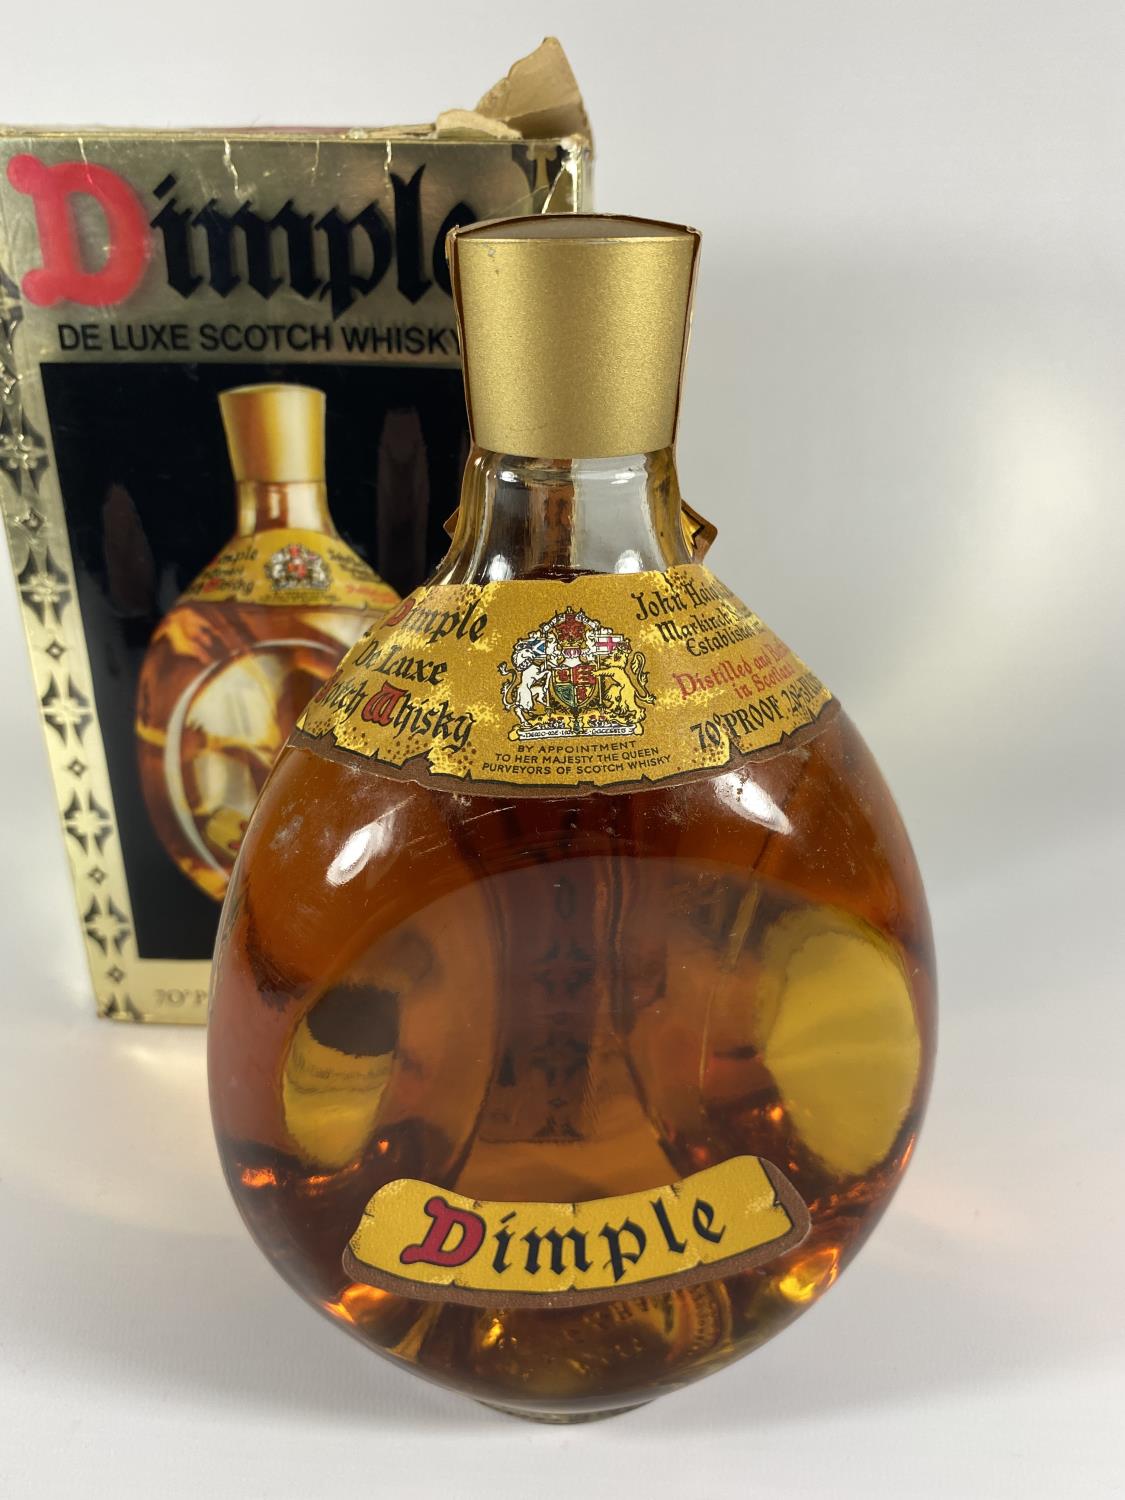 A BOXED DIMPLE DE LUXE SCOTCH WHISKY 70 PROOF 26 2/3 FL.OZS. PROCEEDS TO BE DONATED TO EAST CHESHIRE - Image 2 of 3